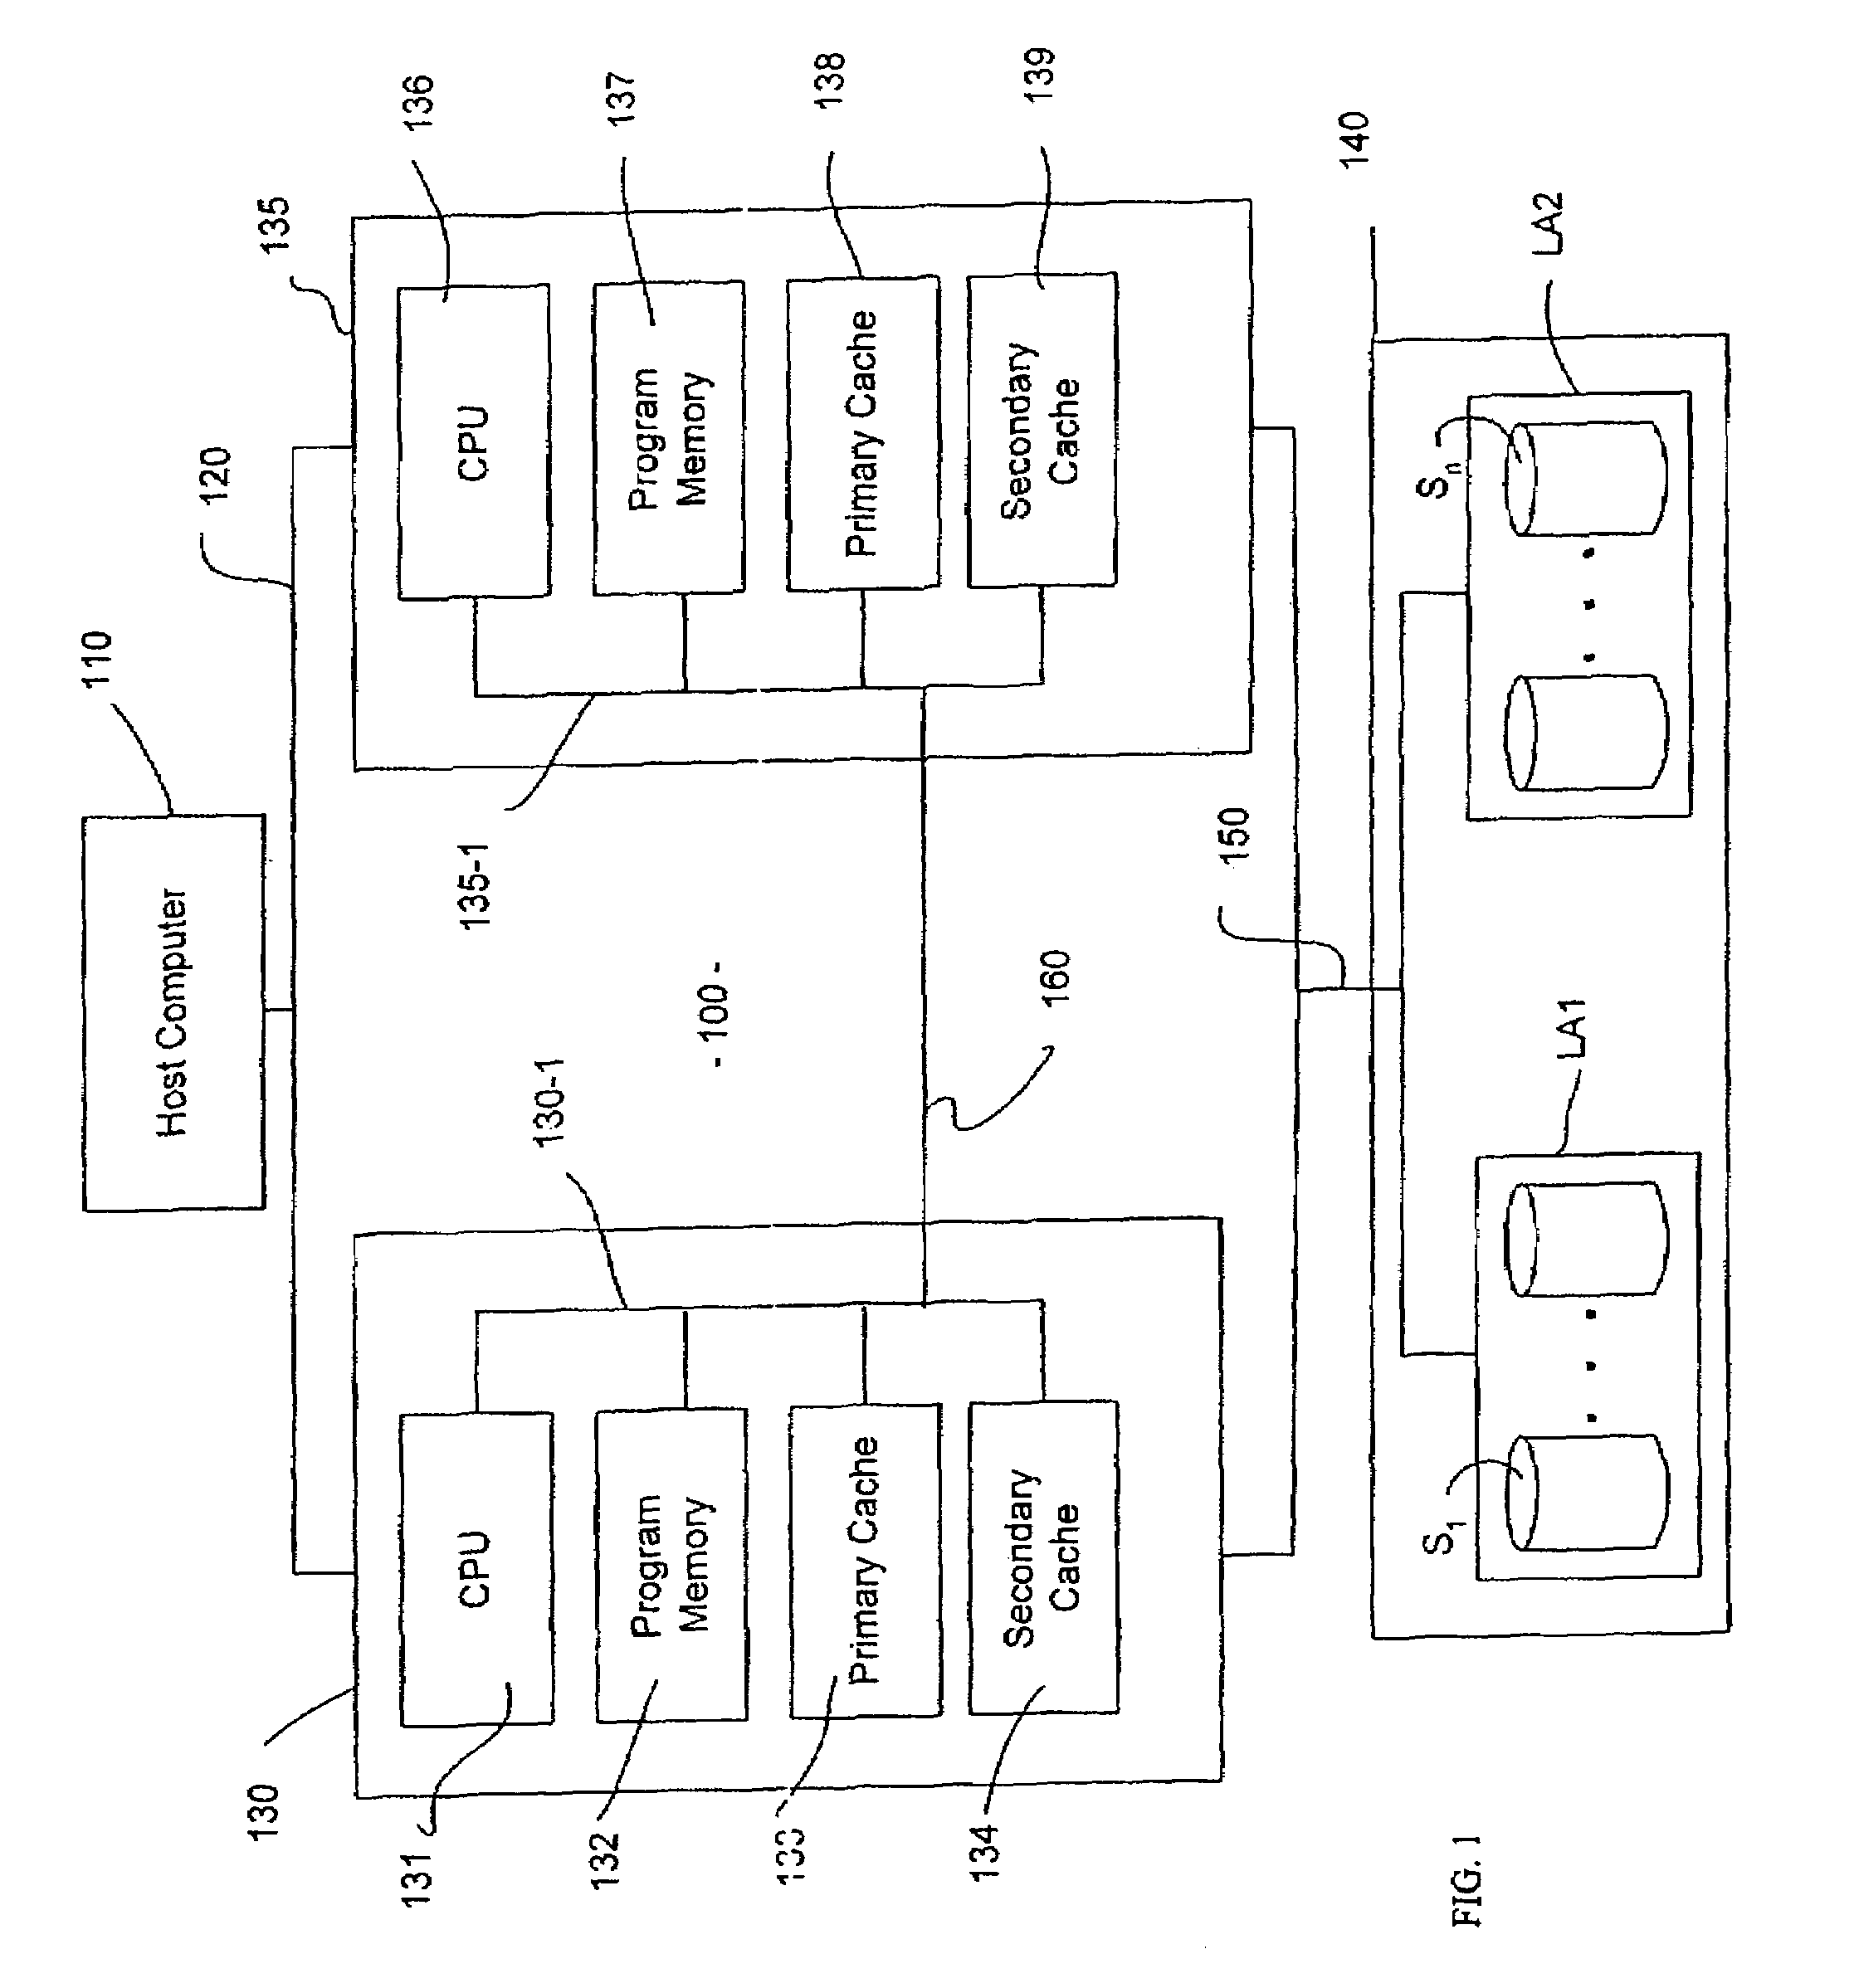 Method, apparatus, and system for preserving cache data of redundant storage controllers